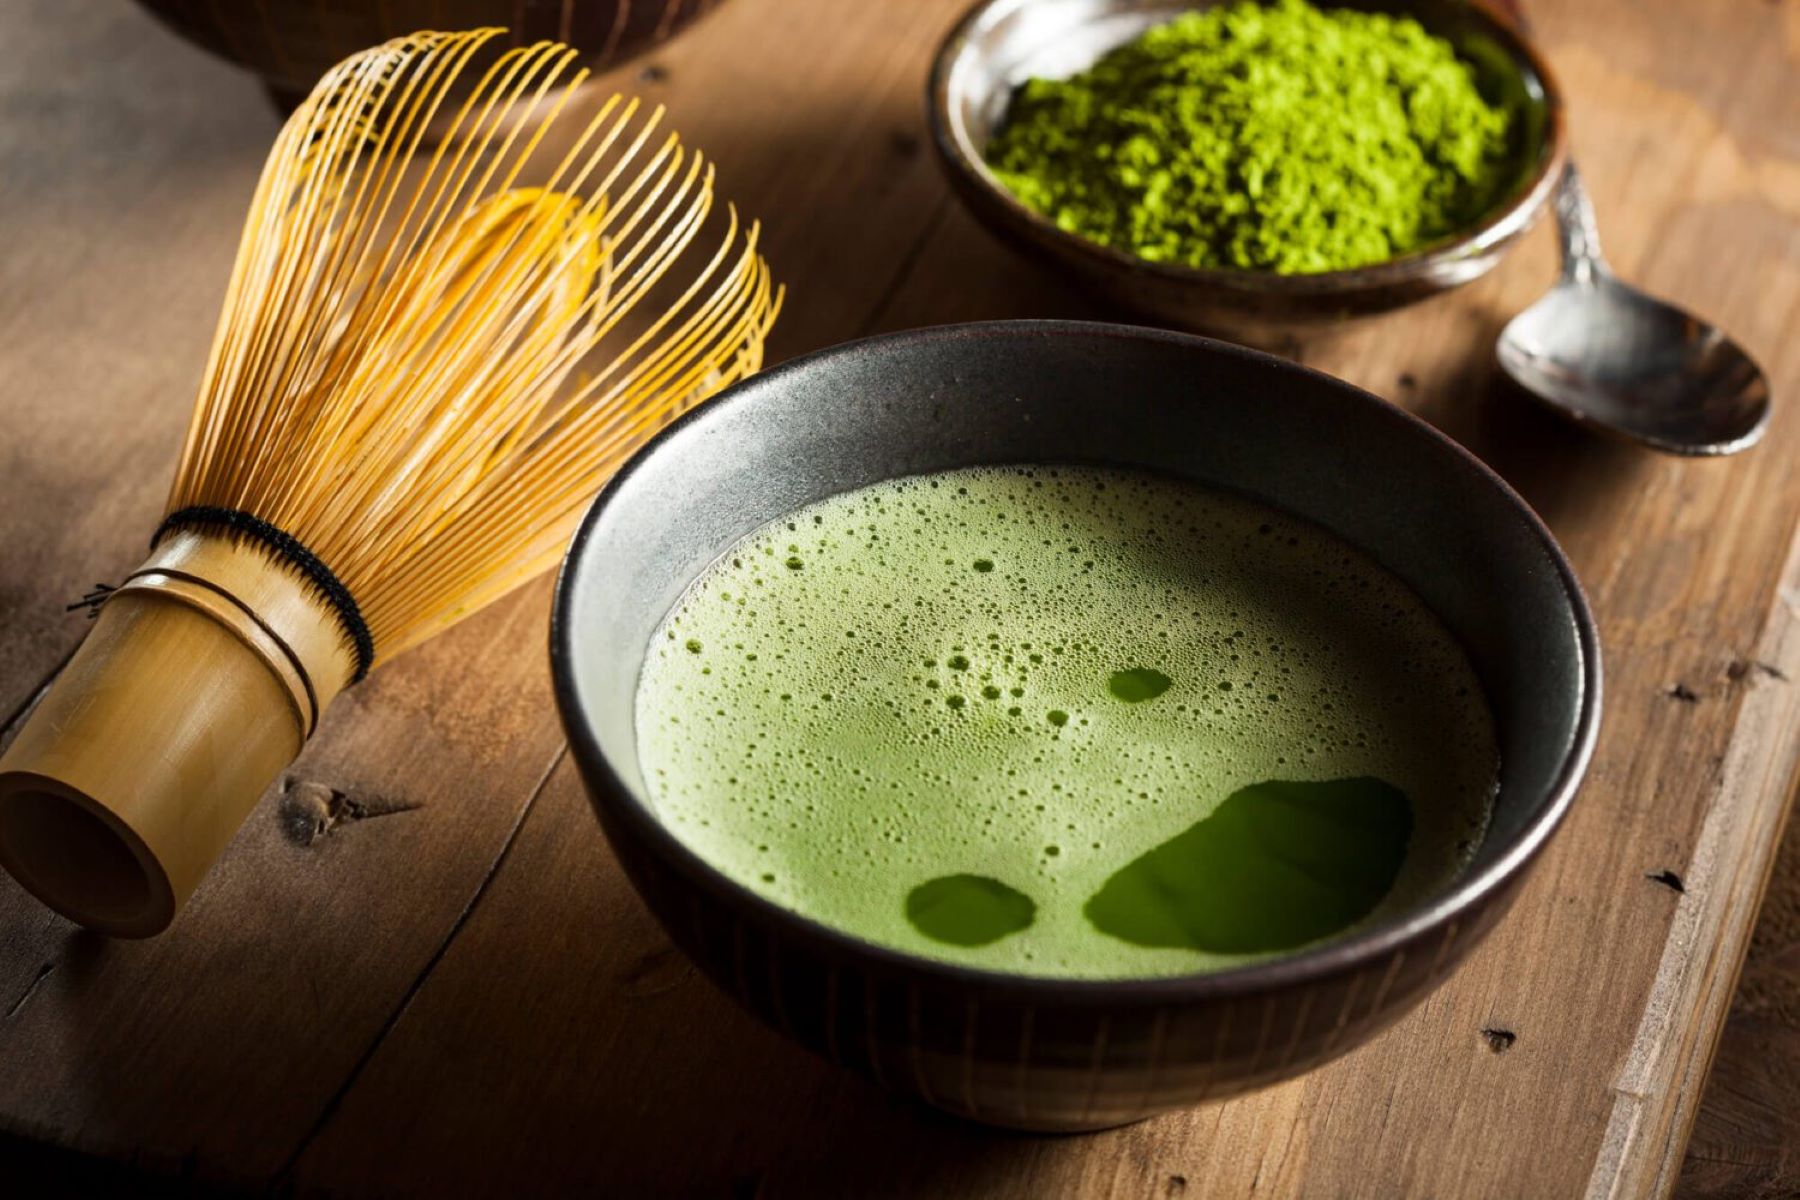 The Surprising Amount Of Caffeine In A Serving Of Matcha Revealed!